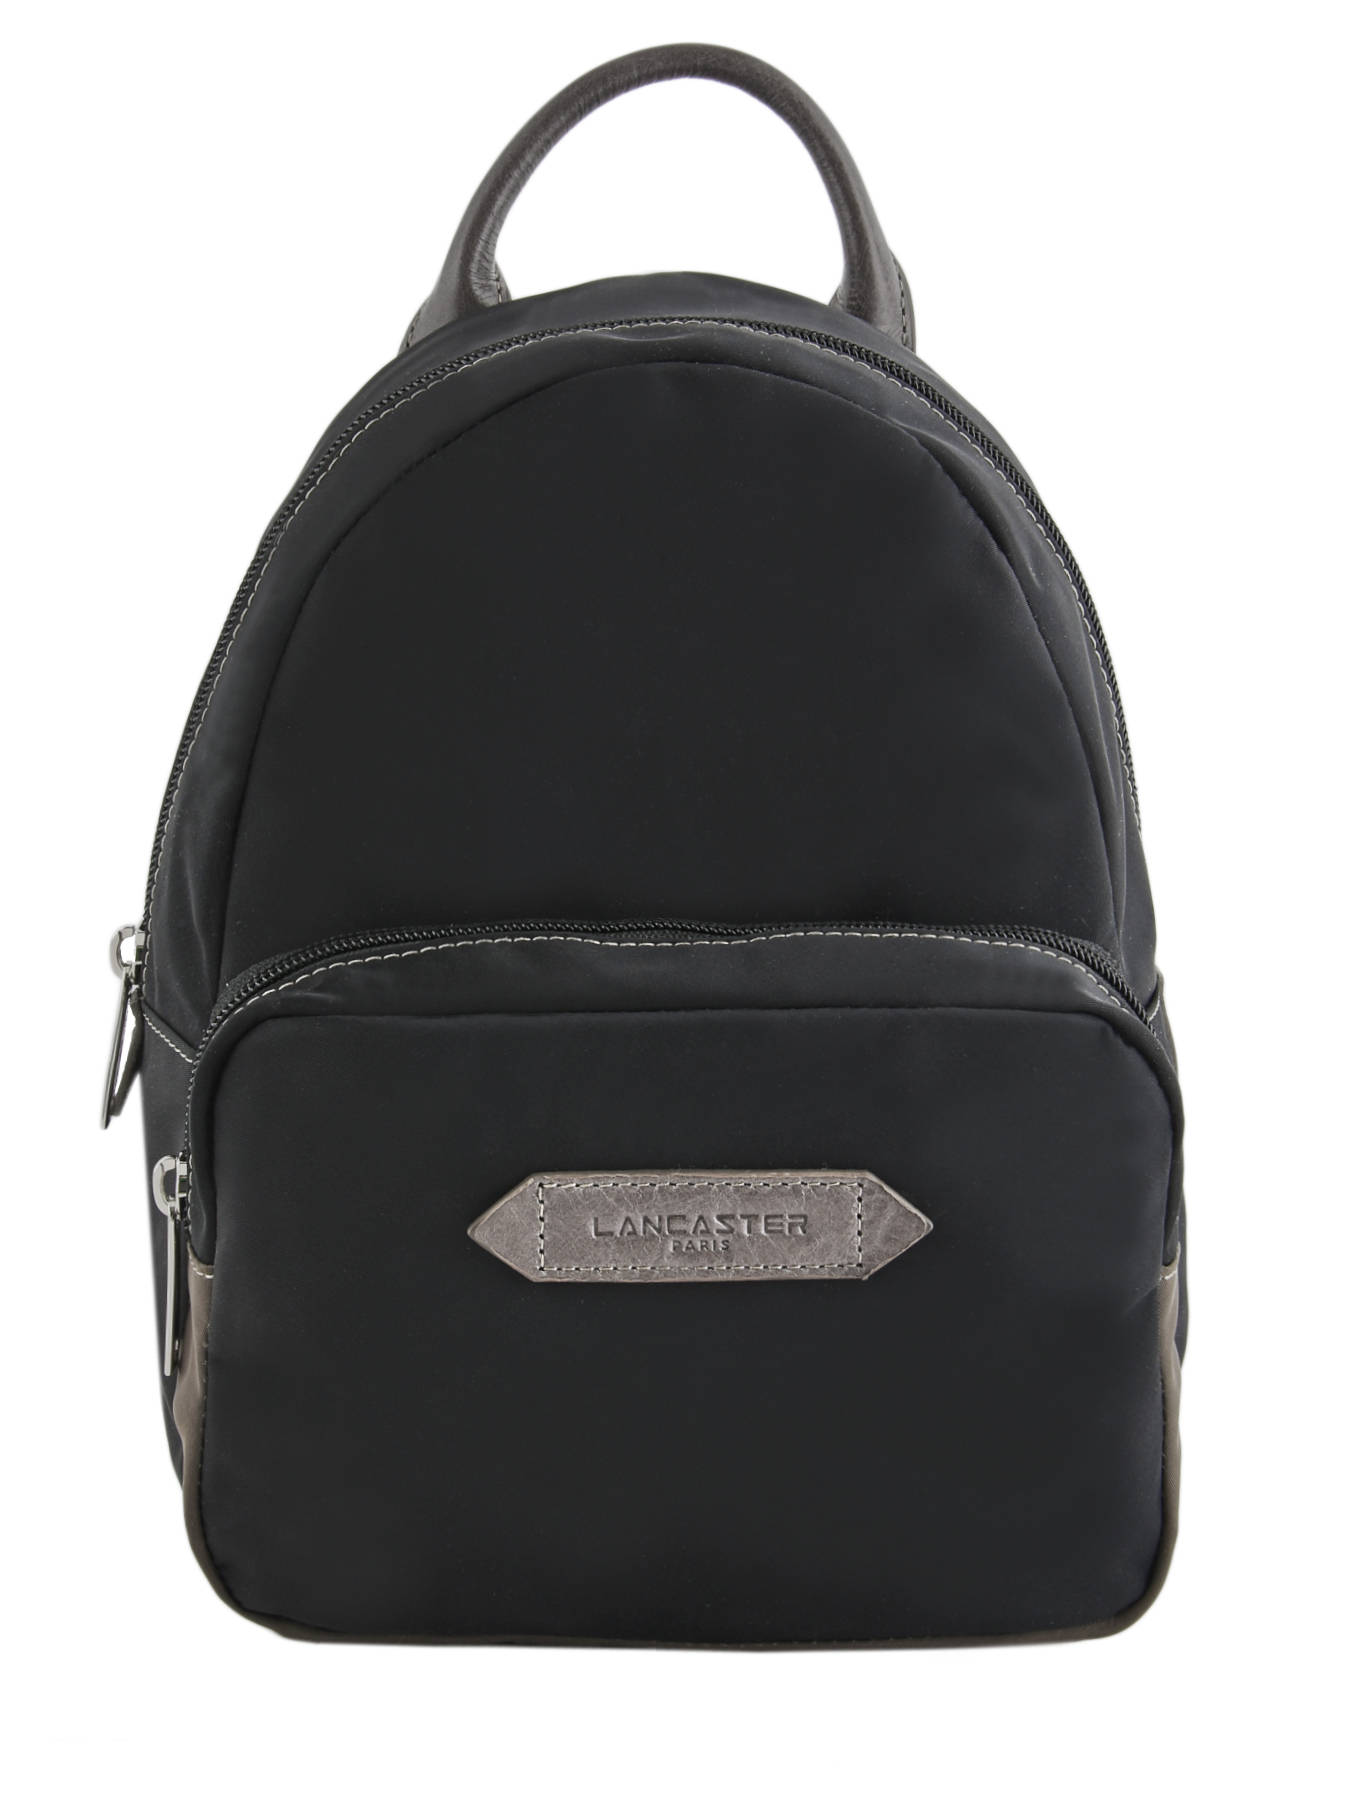 Lancaster Backpack 510-34 - best prices